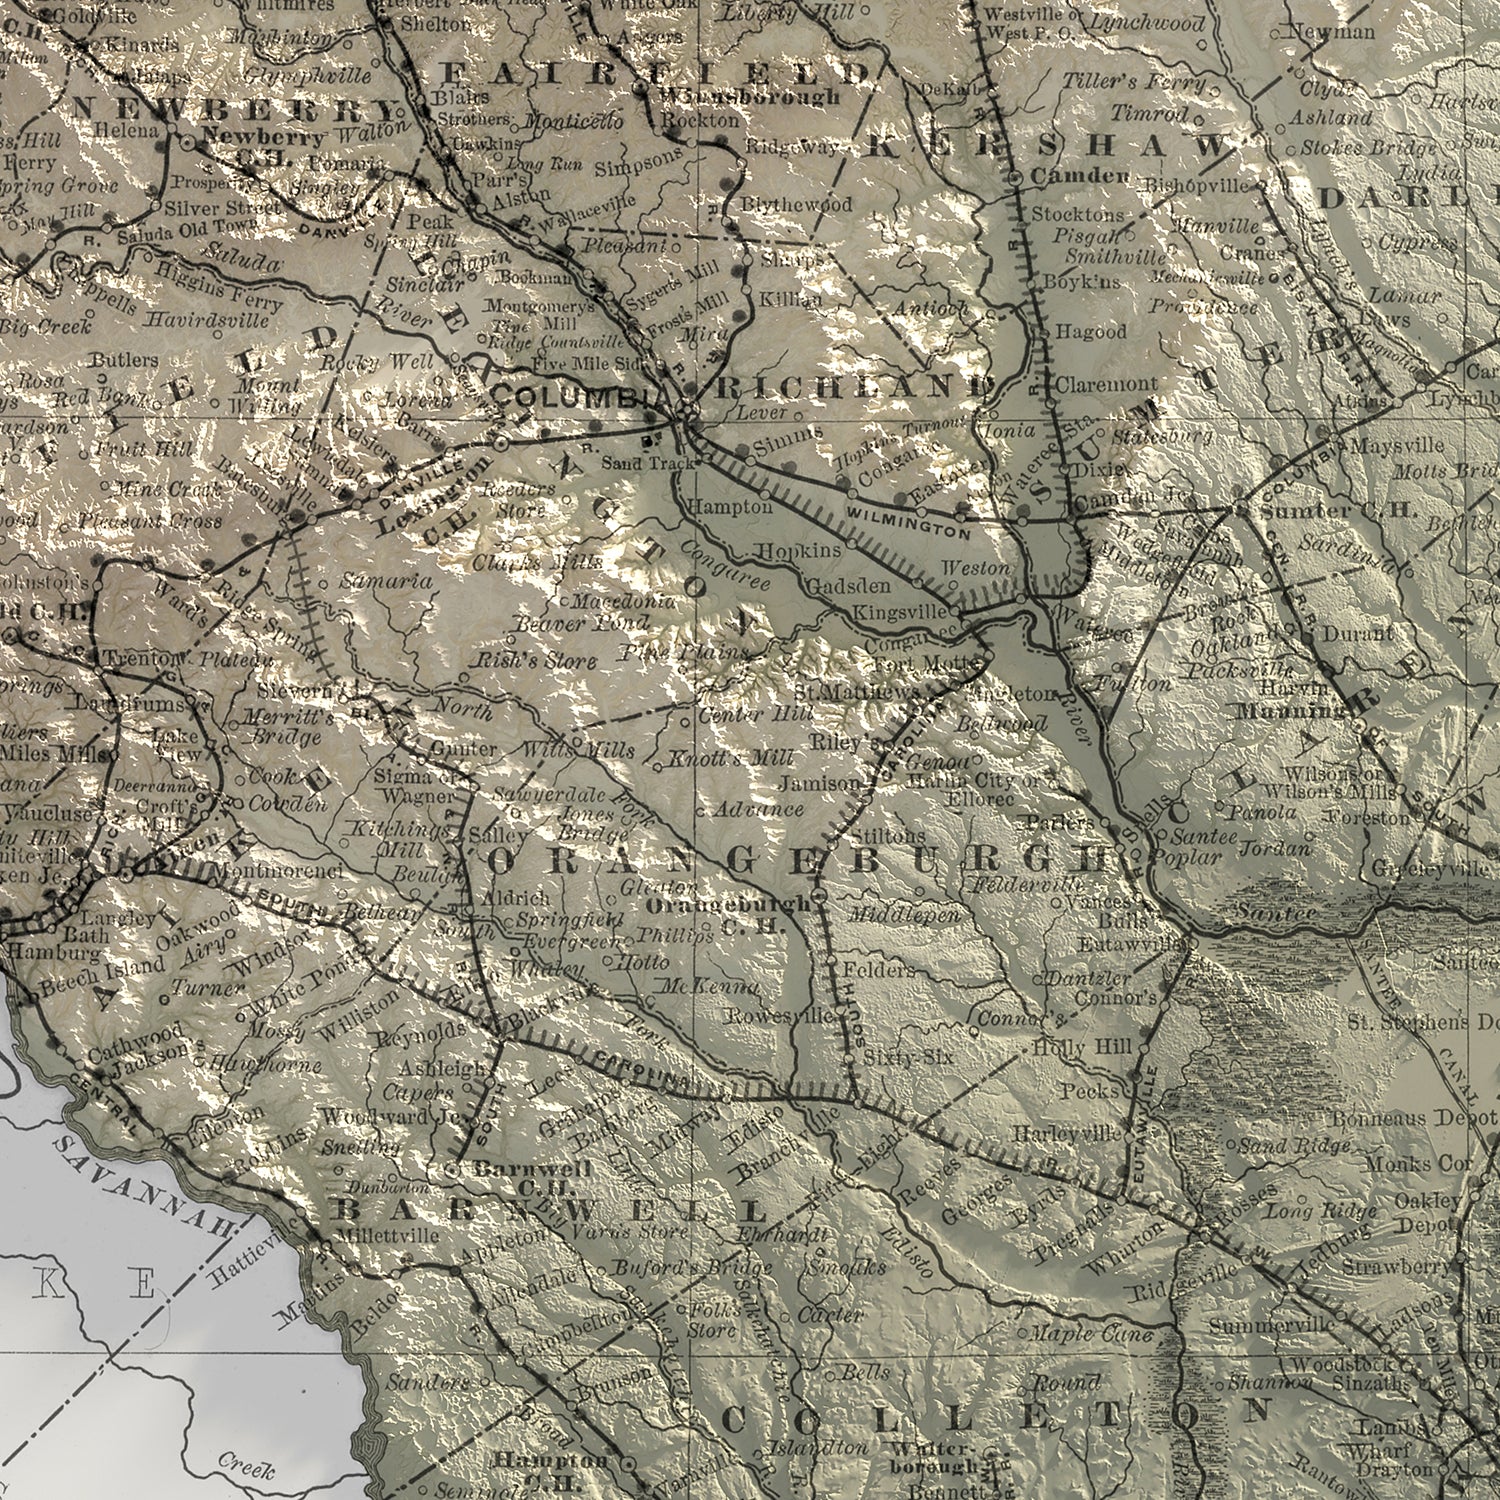 South Carolina - Vintage Shaded Relief Map (1889)